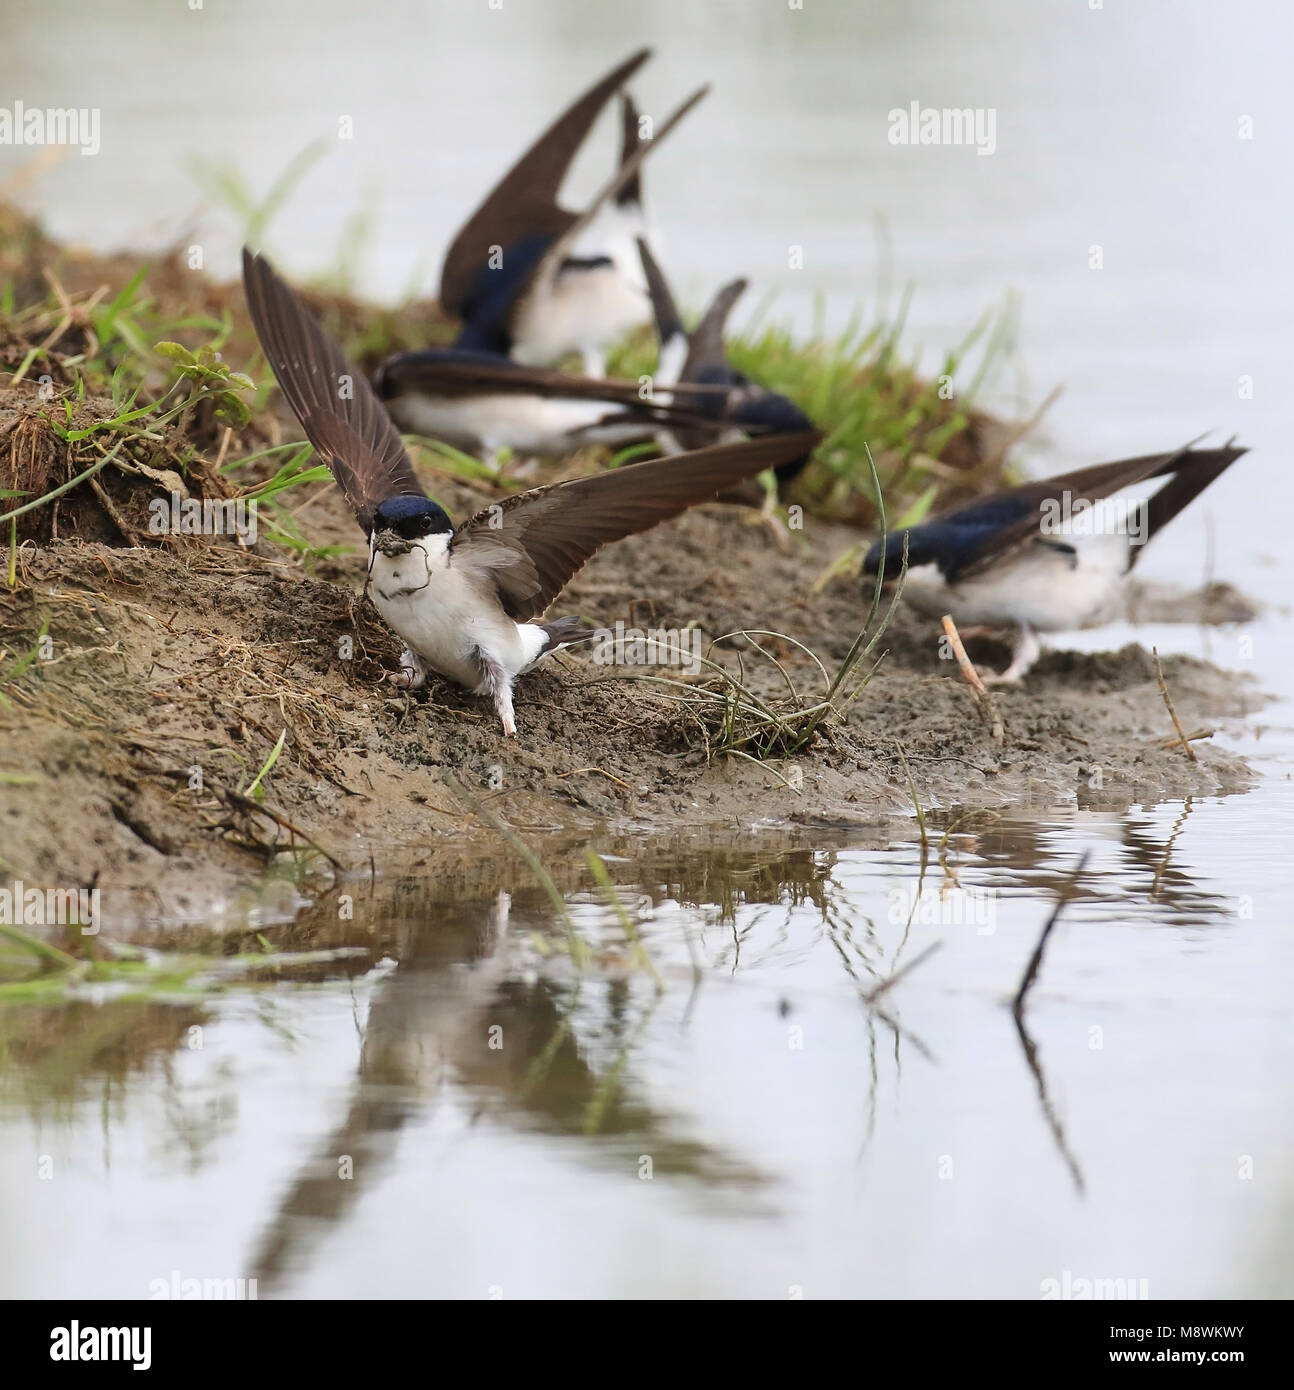 Huiszwaluwen verzamelen nestmateriaal. A bunch of House Martins collects mud for building their nests. Stock Photo